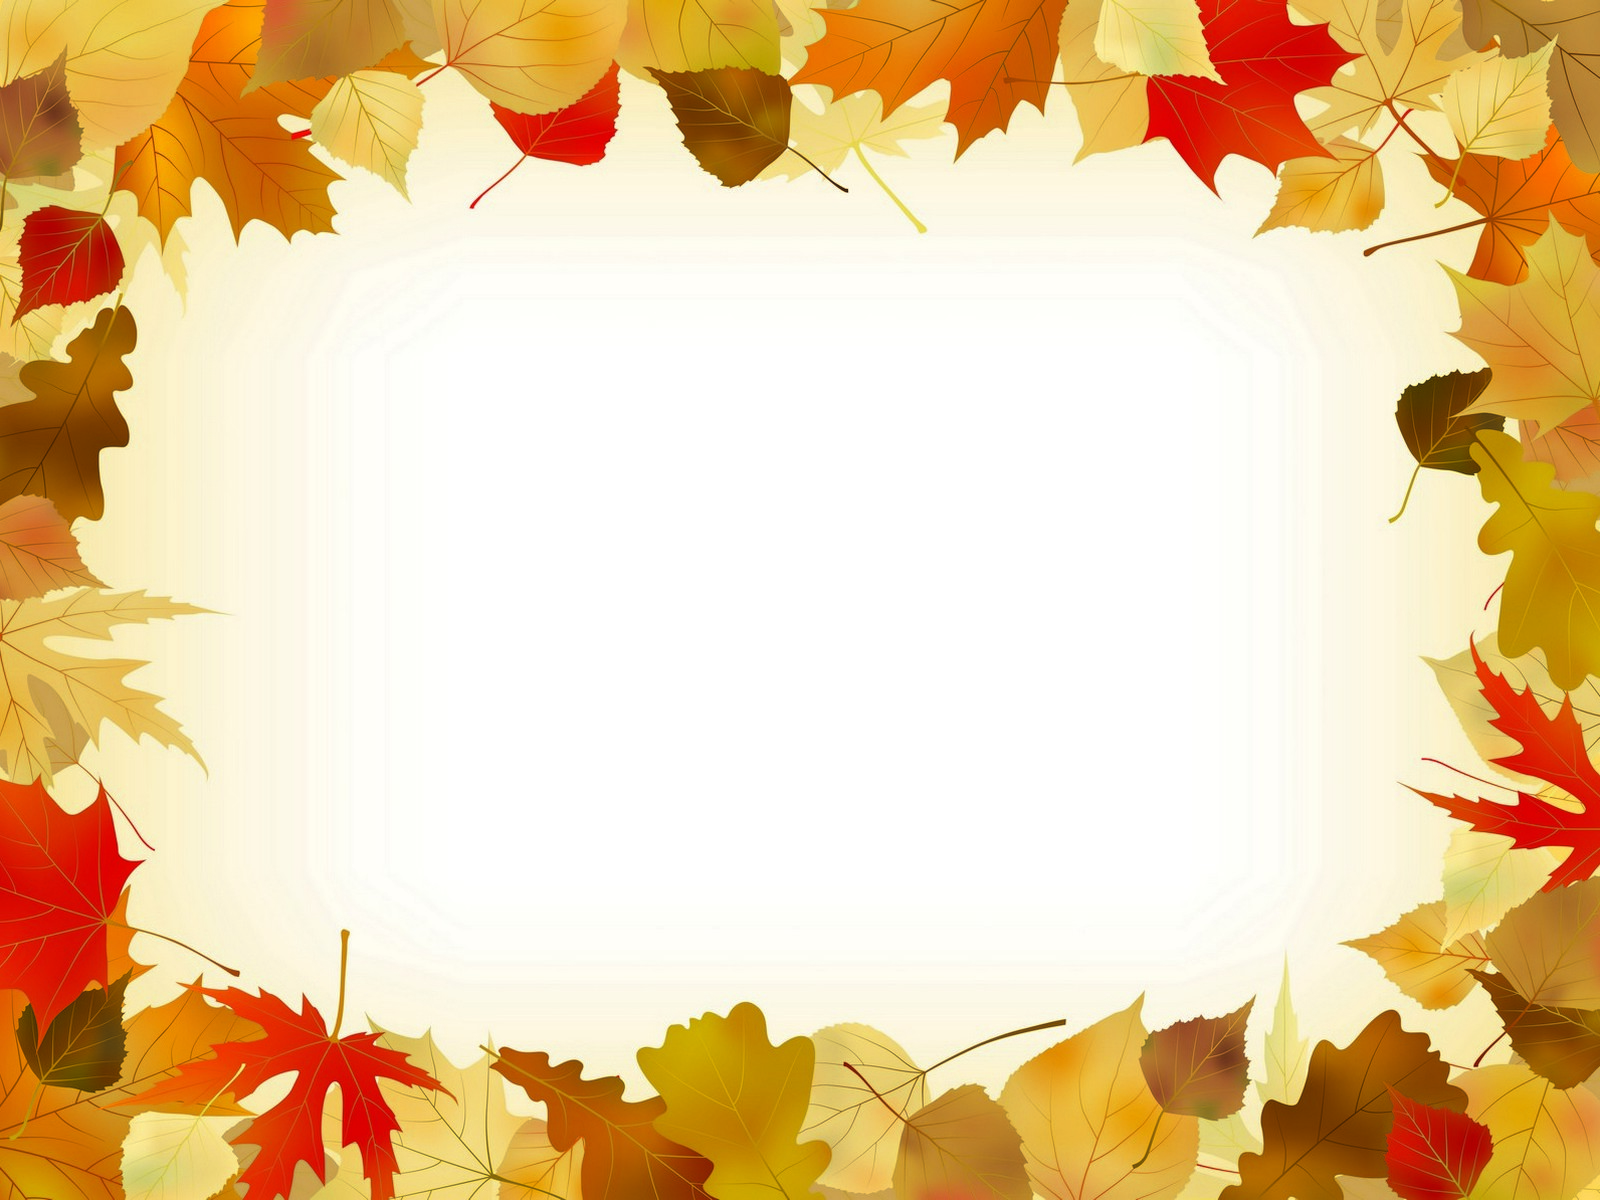 Autumn Leaves Frame PPT Backgrounds